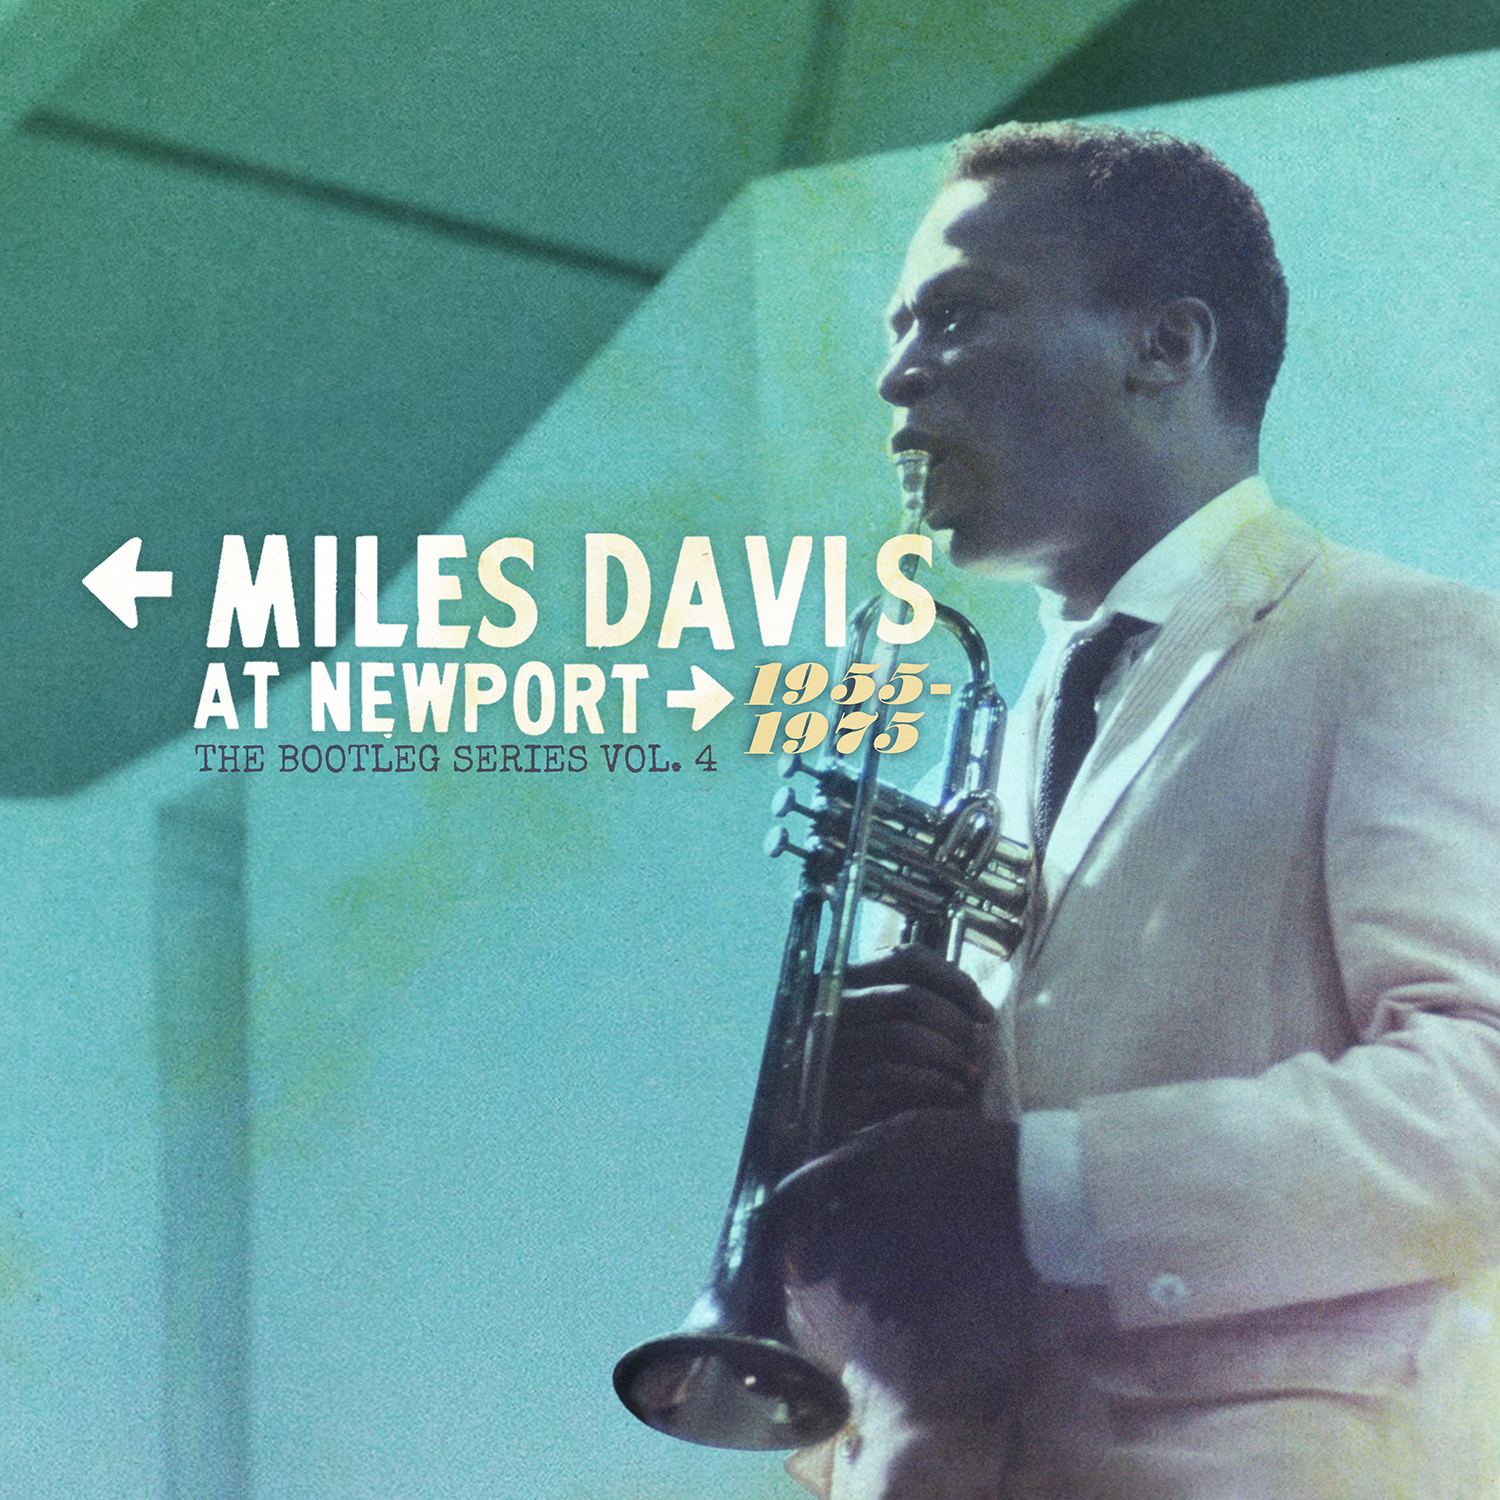 MILES DAVIS AT NEWPORT 1955-1975: THE BOOTLEG SERIES VOL. 4 SCHEDULED FOR RELEASE JULY 17 THROUGH COLUMBIA/LEGACY RECORDINGS